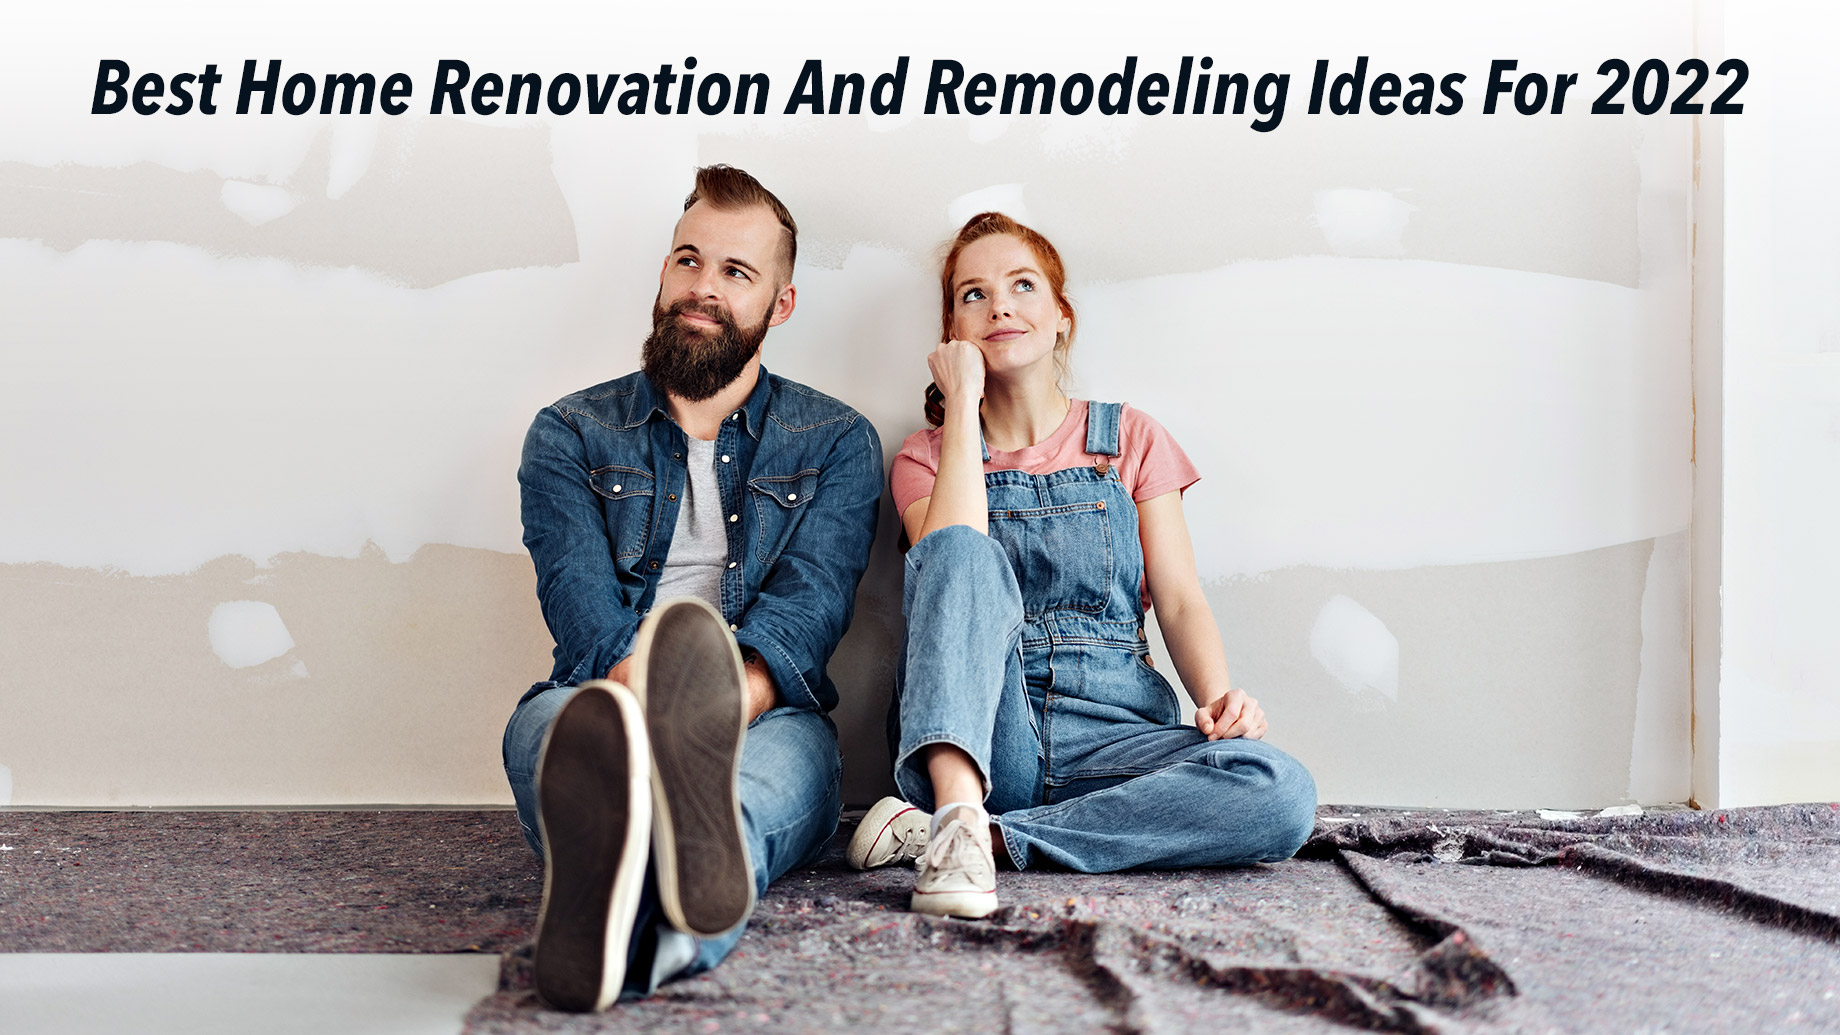 Best Home Renovation And Remodeling Ideas For 2022